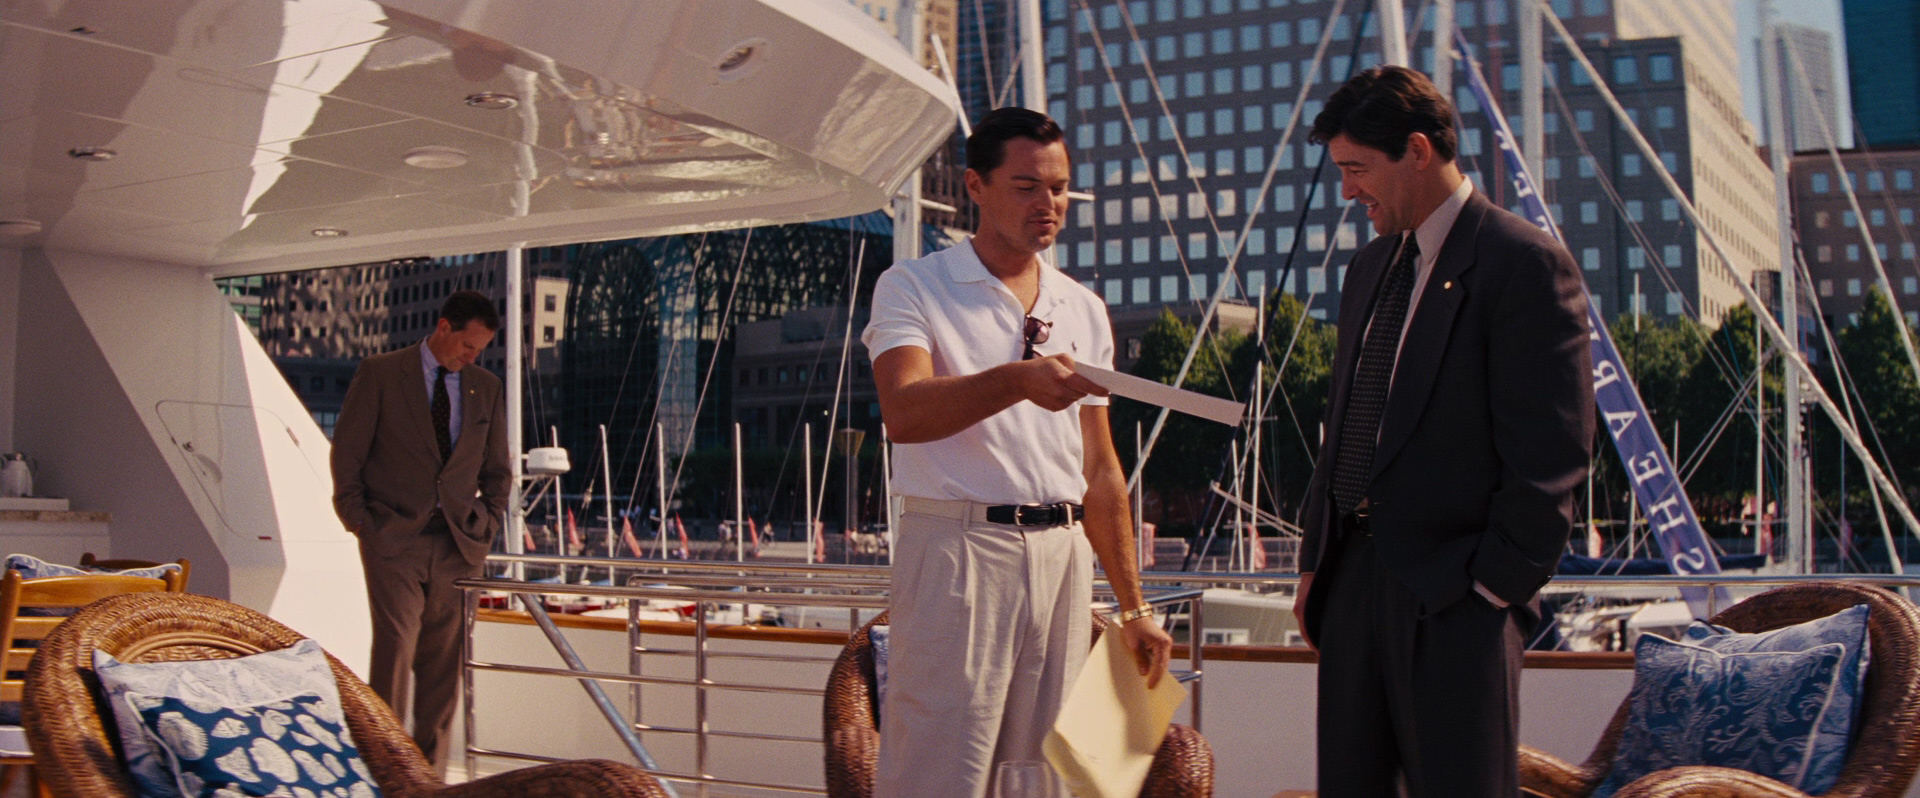 Kyle Chandler in The Wolf of Wall Street